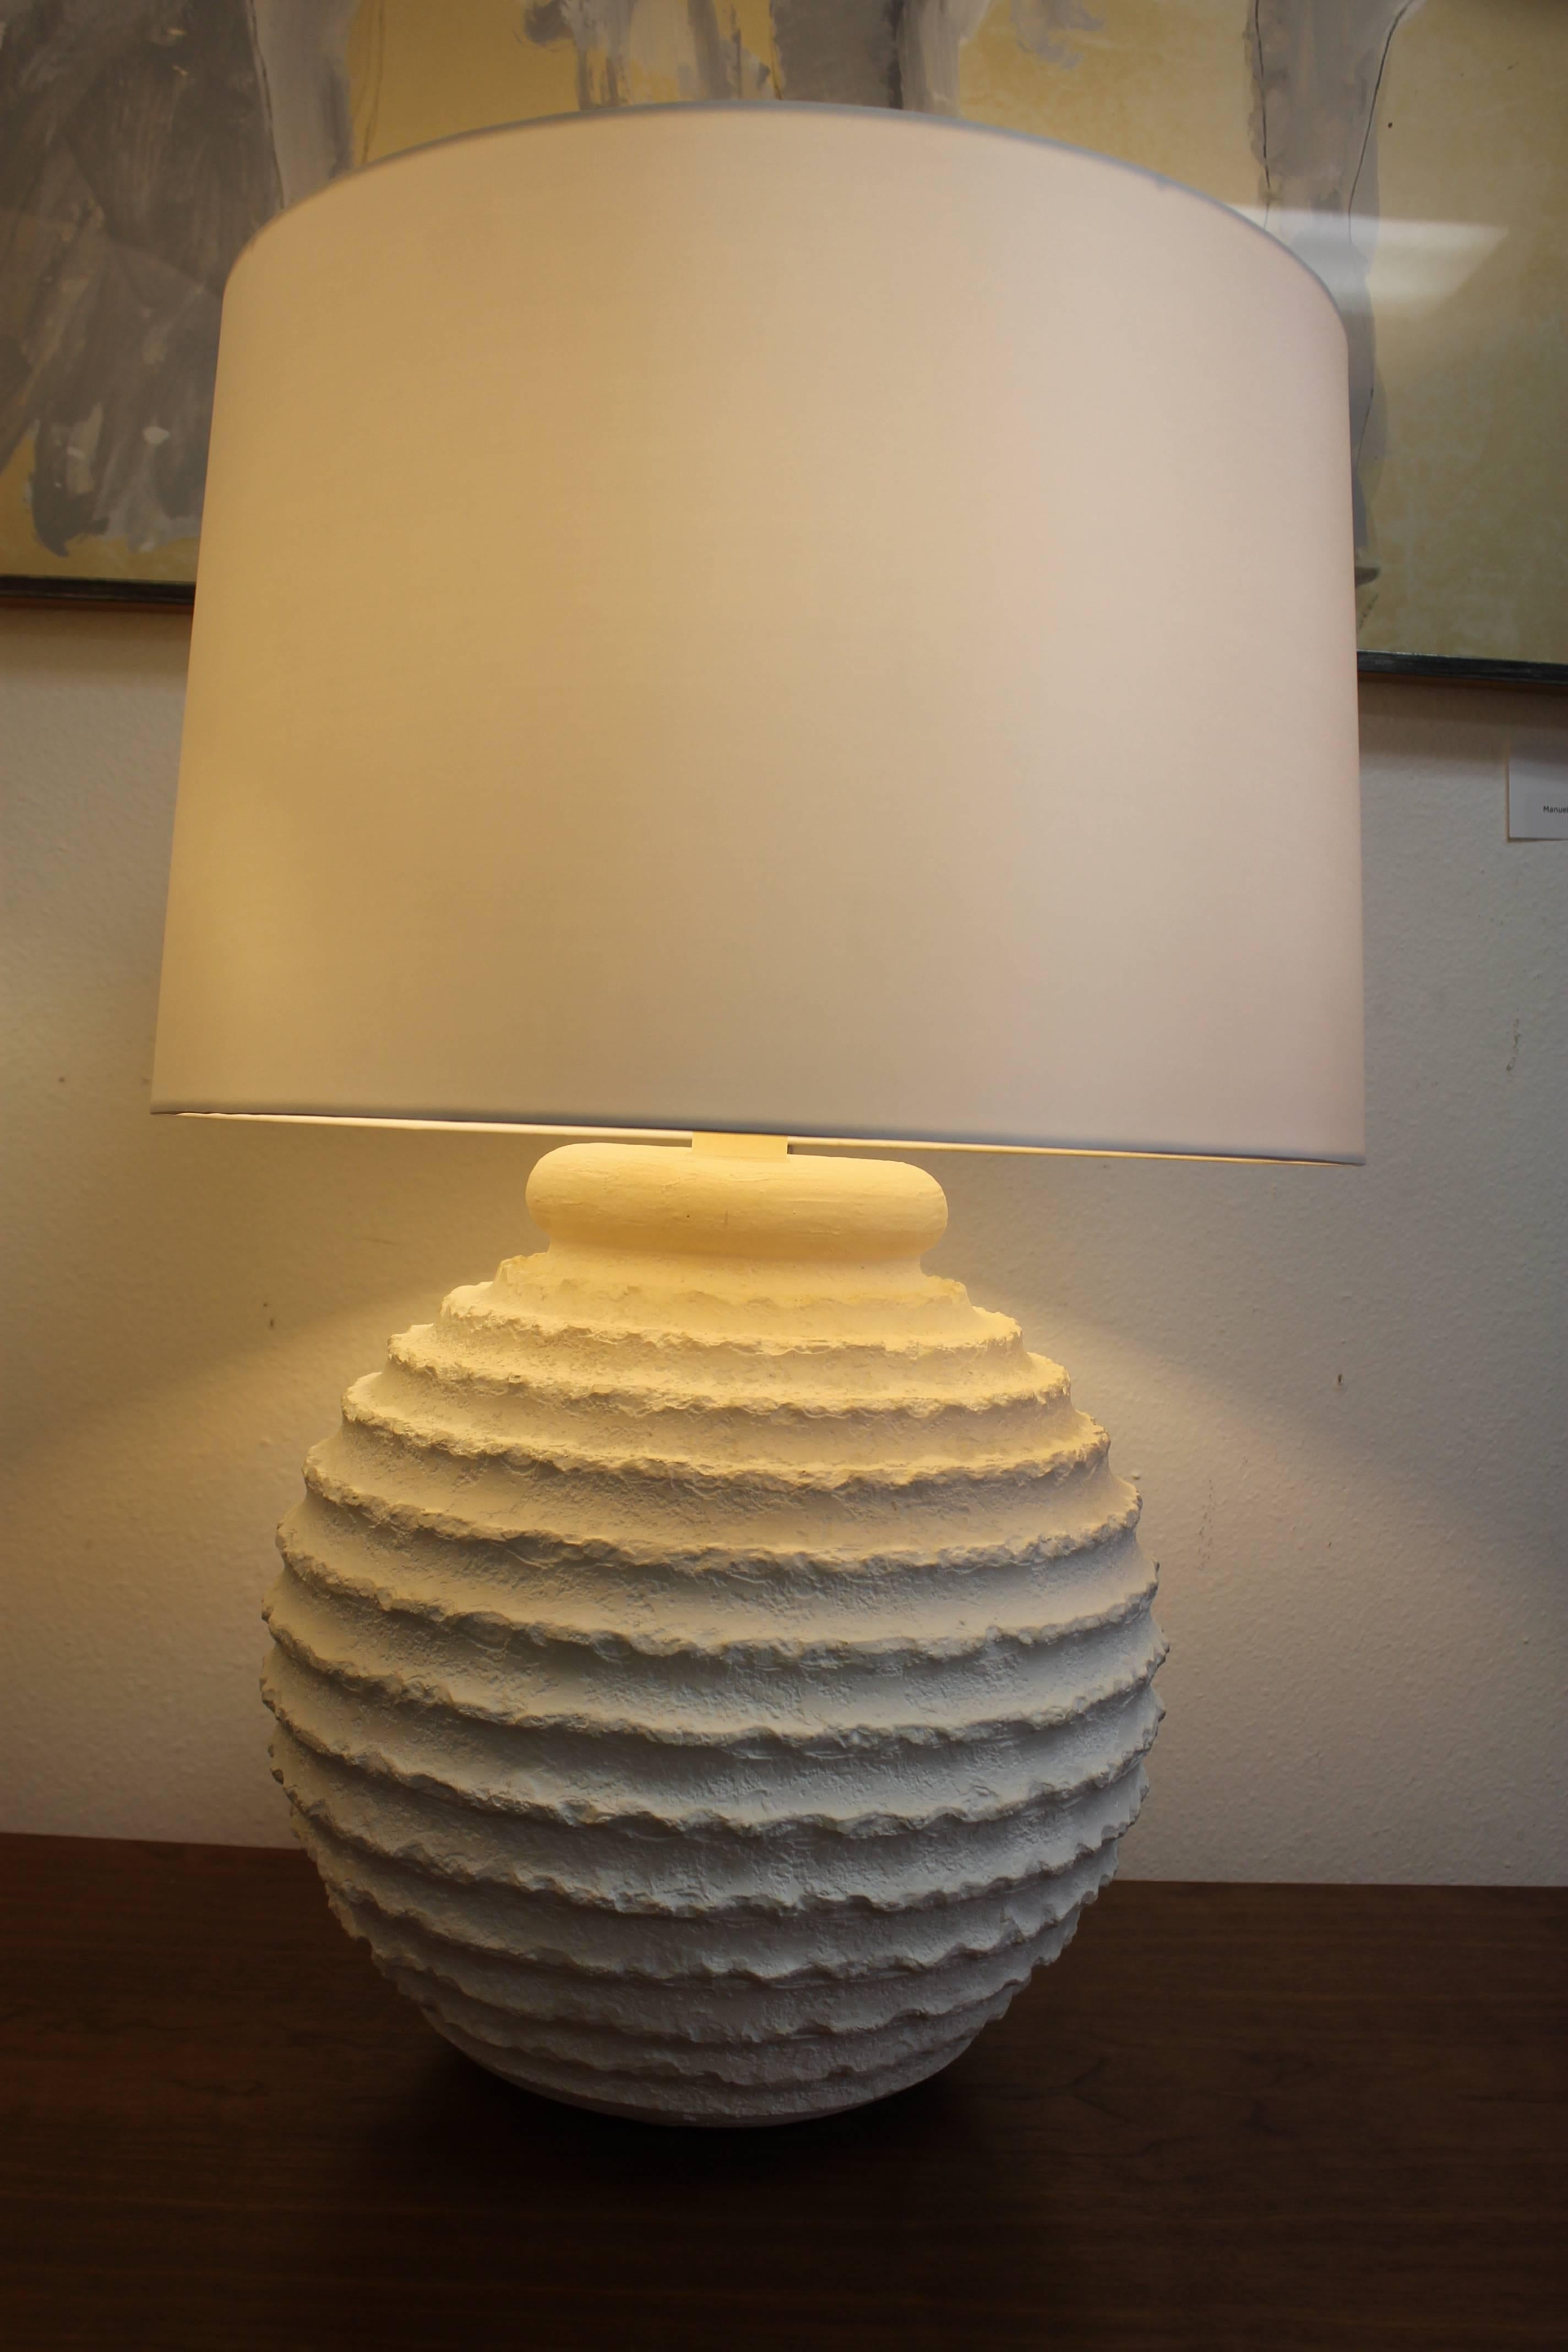 Pair of midcentury bulbous lamps. The plaster portion is 14.5